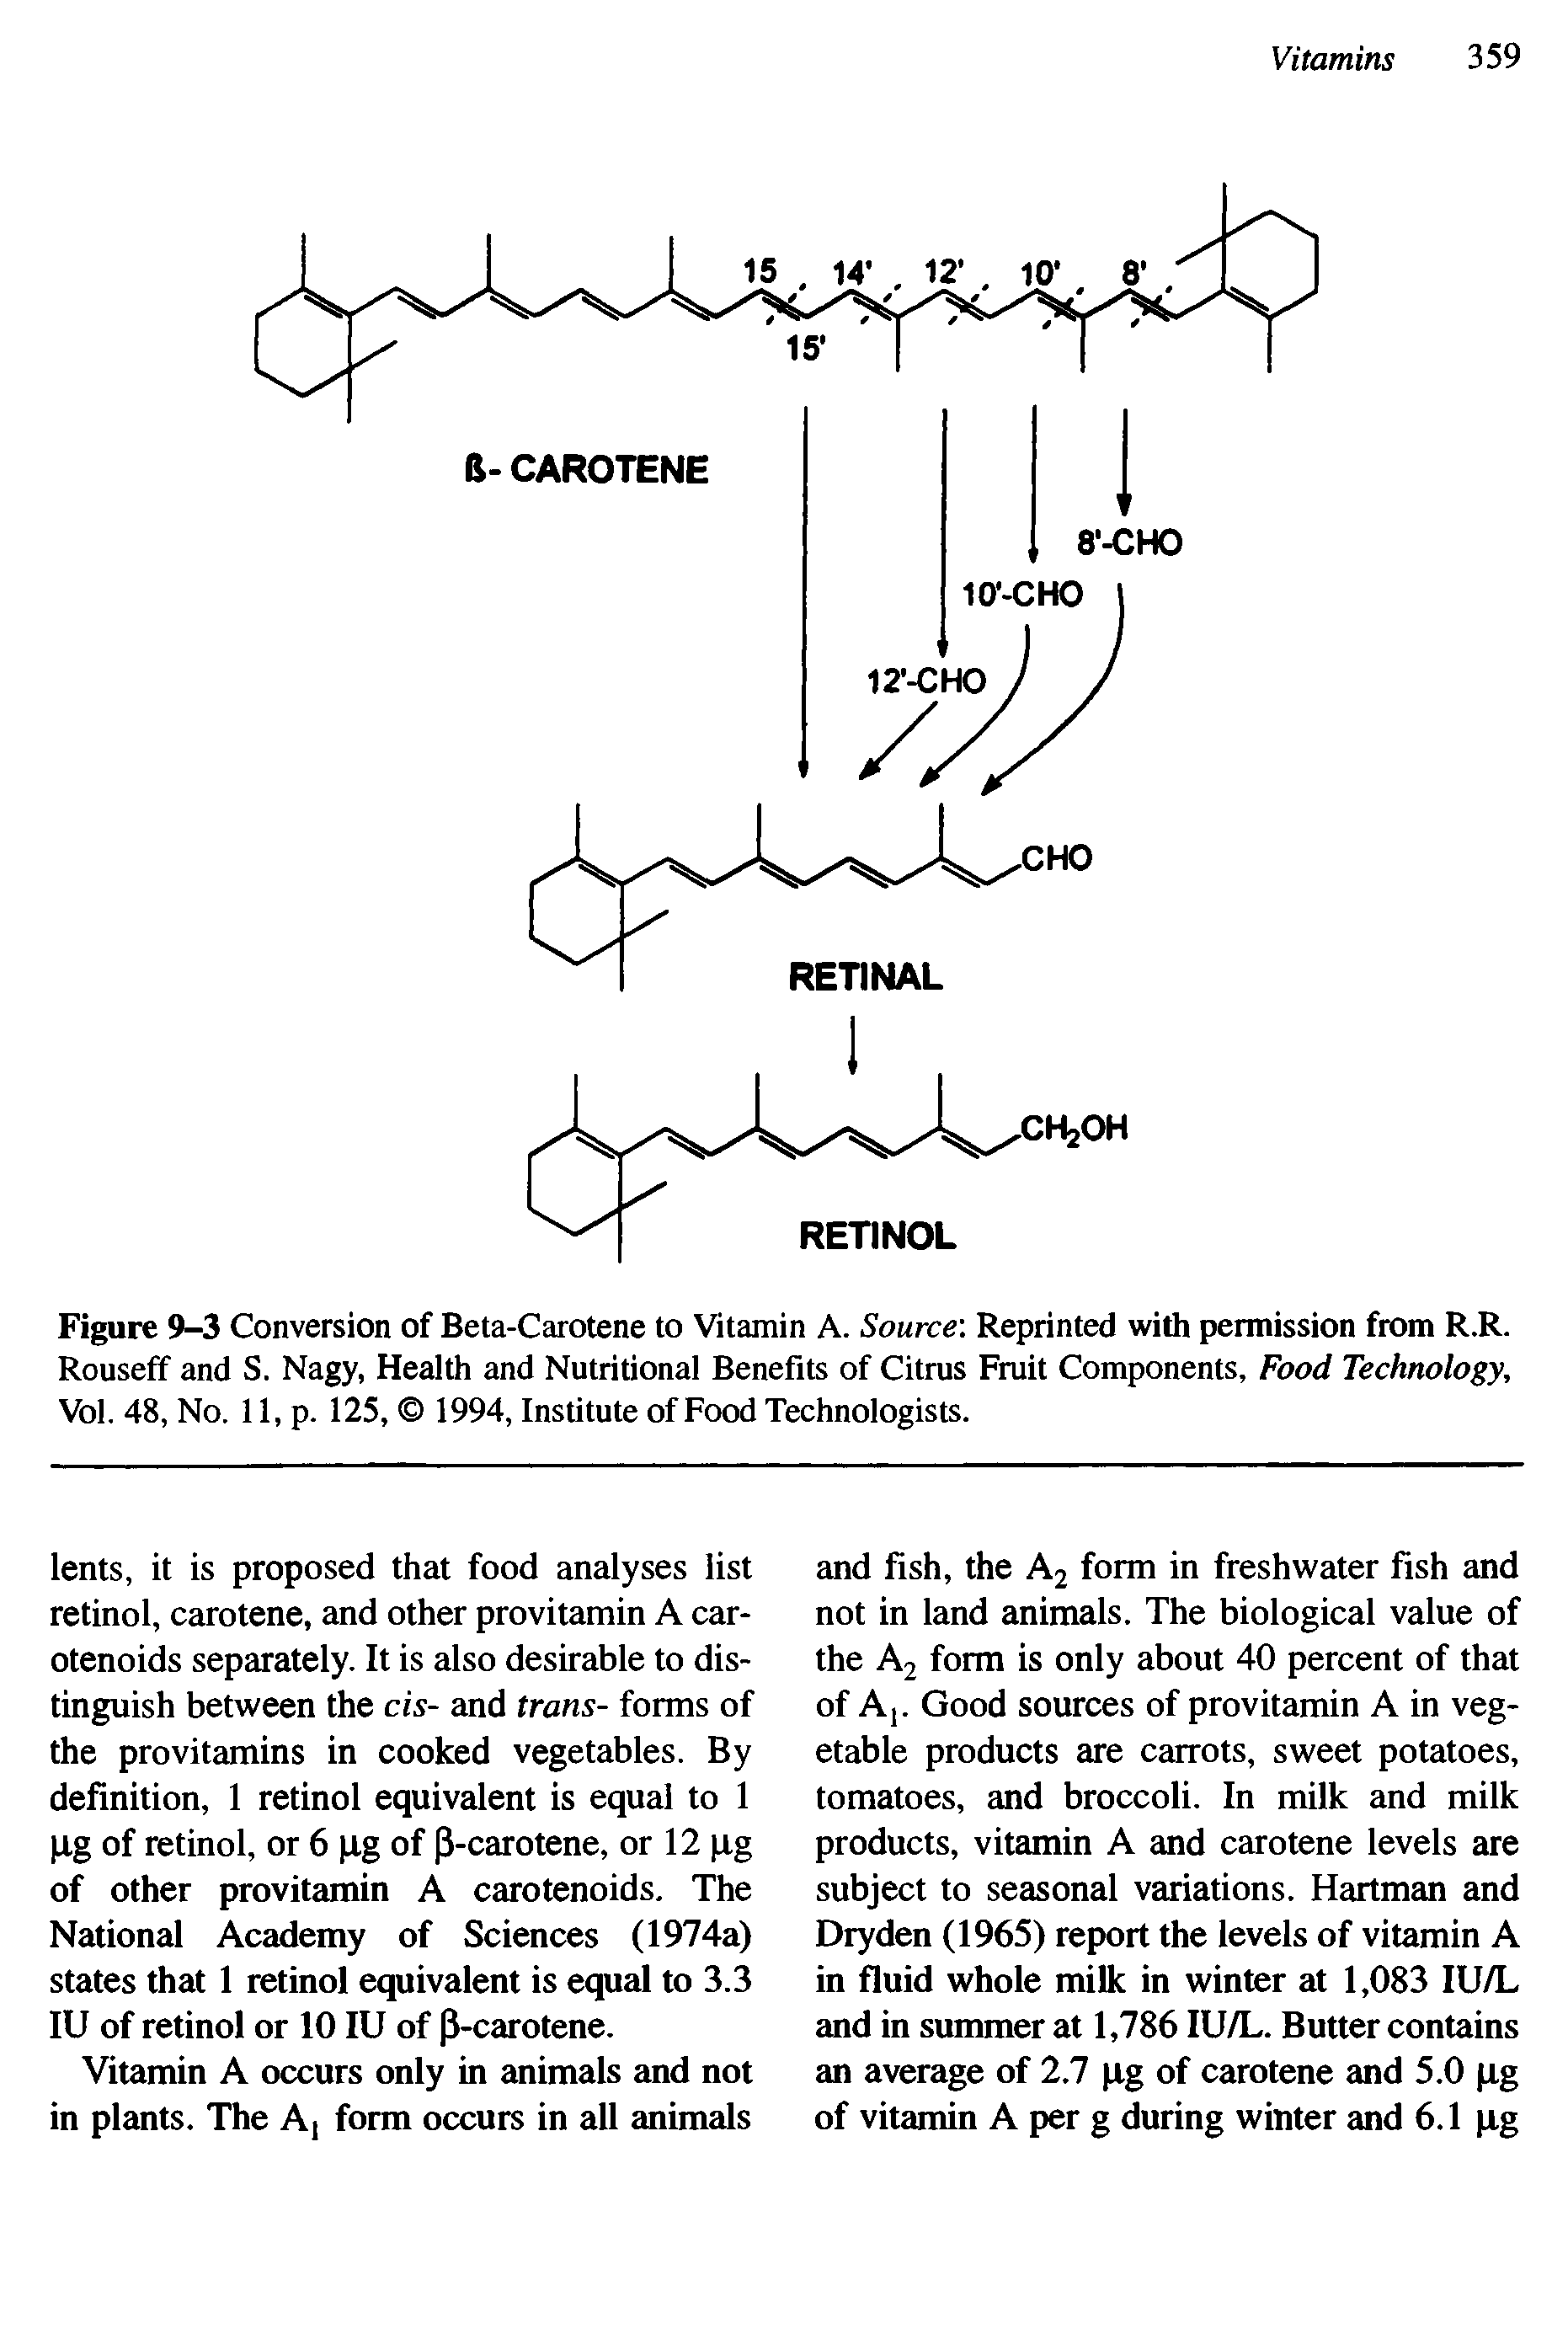 Figure 9-3 Conversion of Beta-Carotene to Vitamin A. Source Reprinted with permission from R.R. Rouseff and S. Nagy, Health and Nutritional Benefits of Citrus Fruit Components, Food Technology, Vol. 48, No. 11, p. 125, 1994, Institute of Food Technologists.